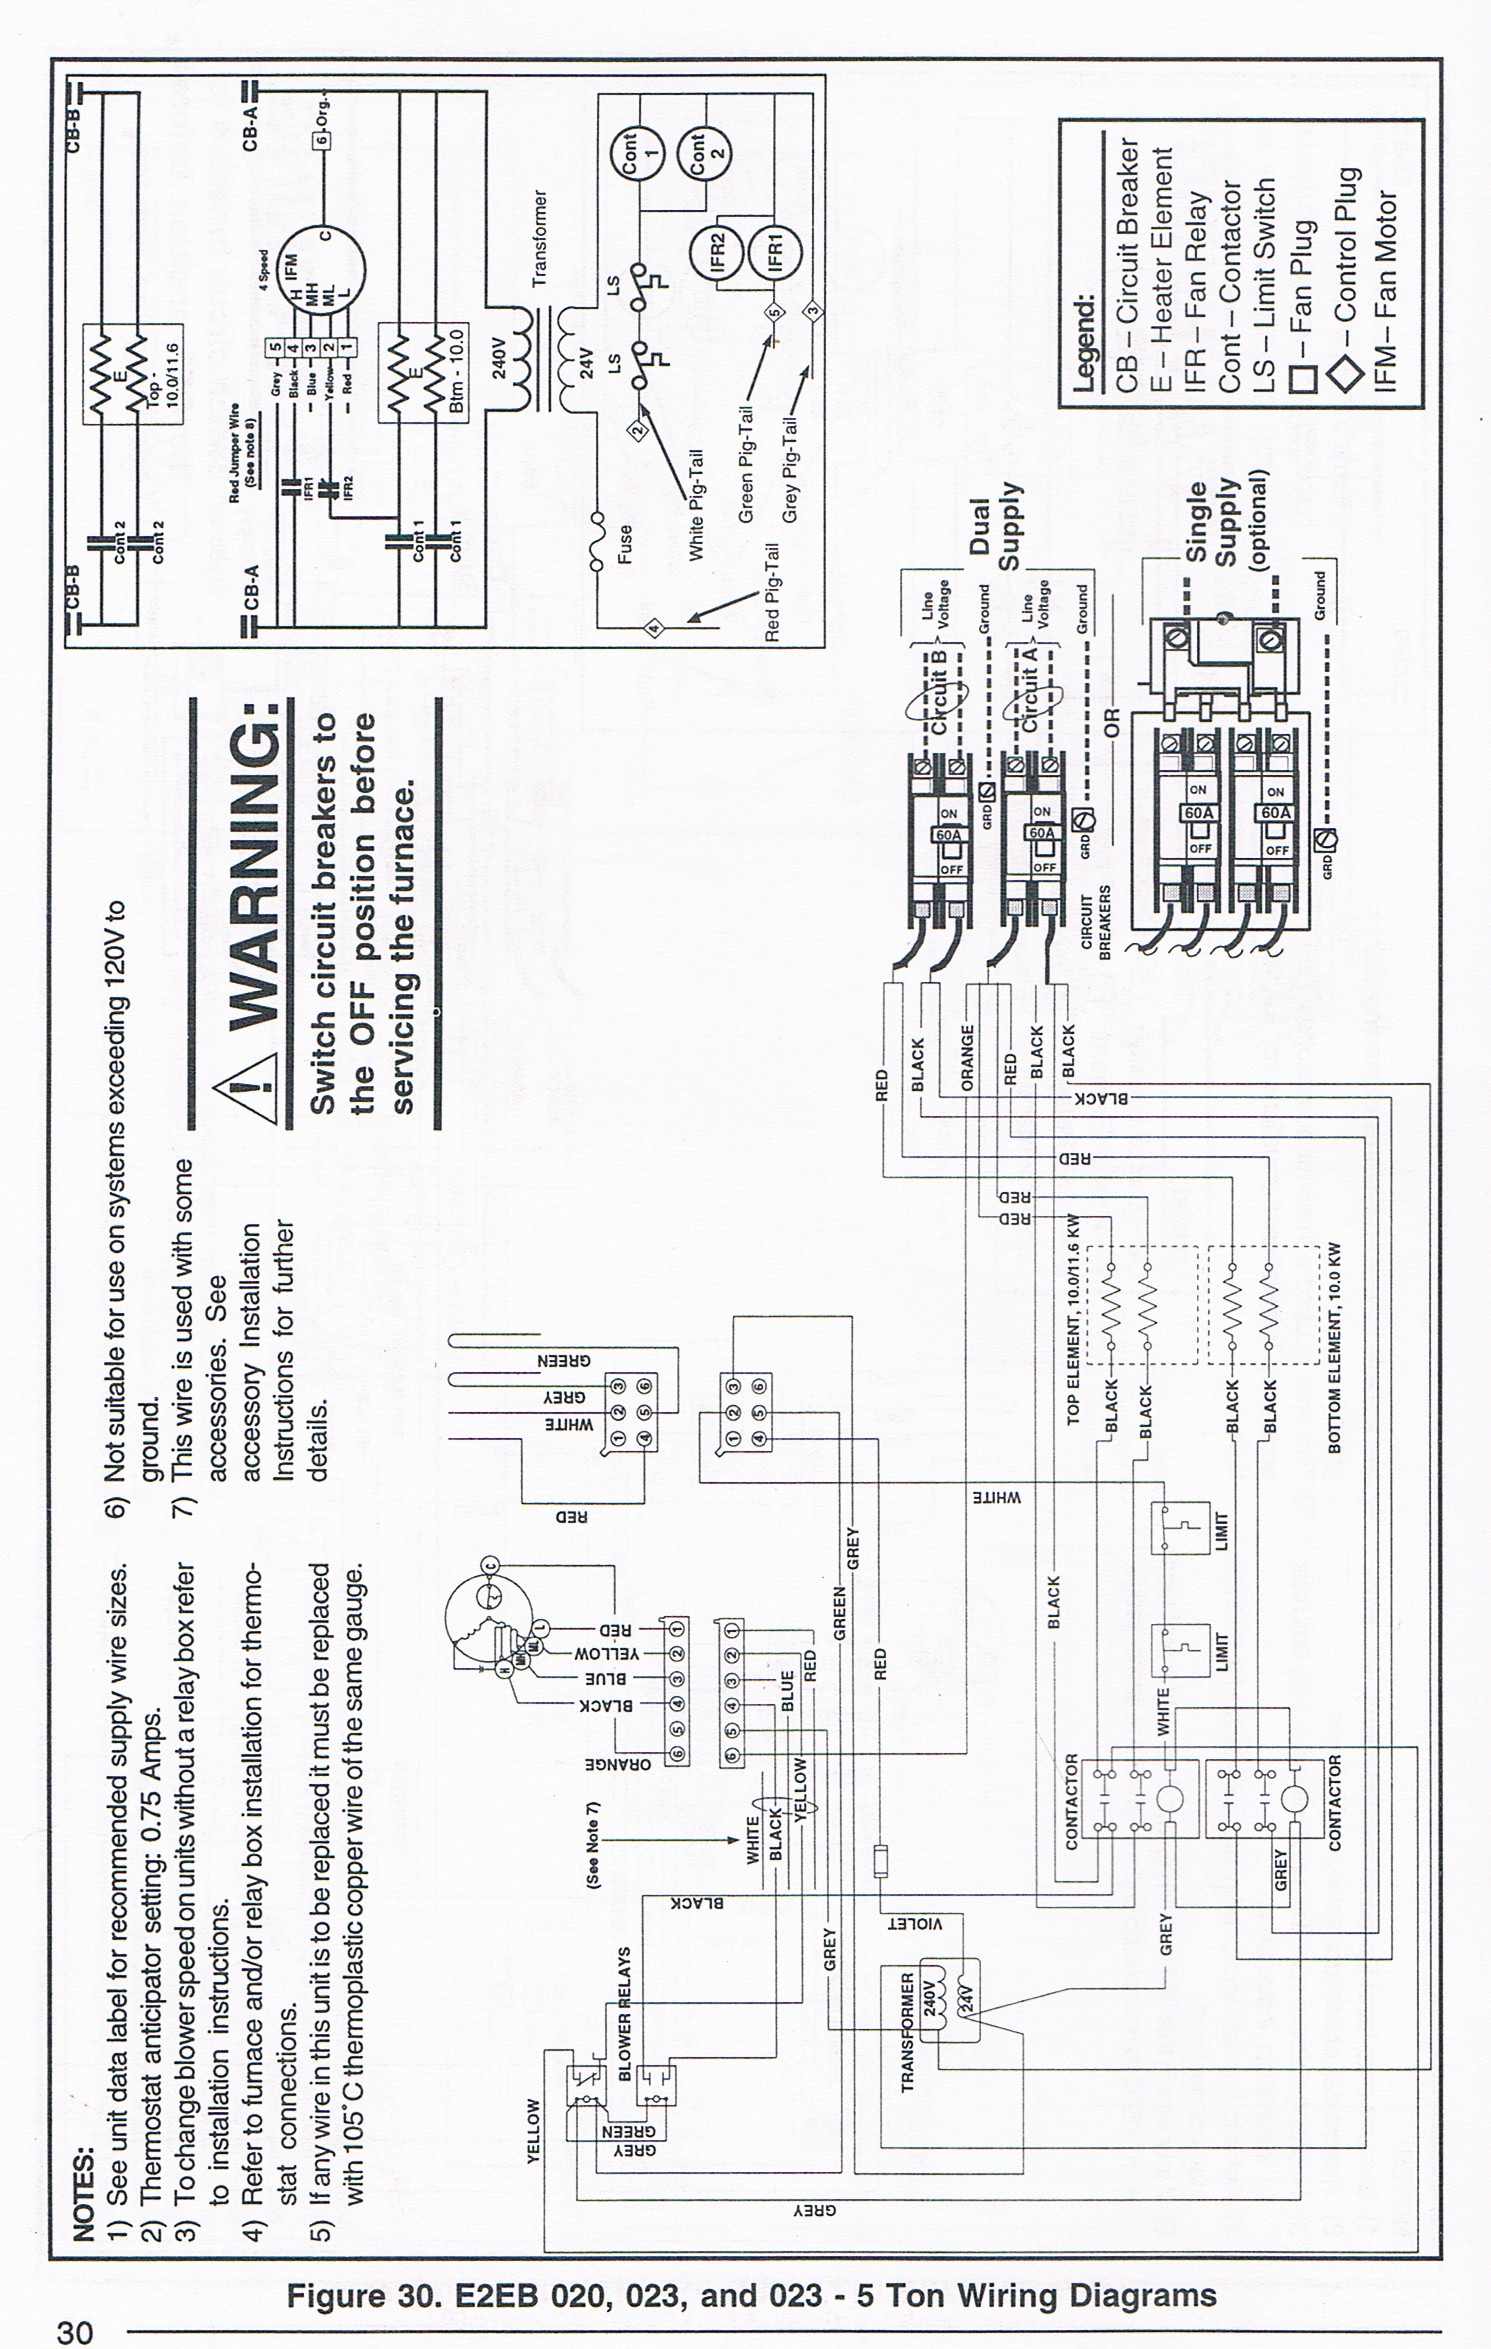 Nordyne Mobile Home Electric Furnace Wiring Diagram from schematron.org